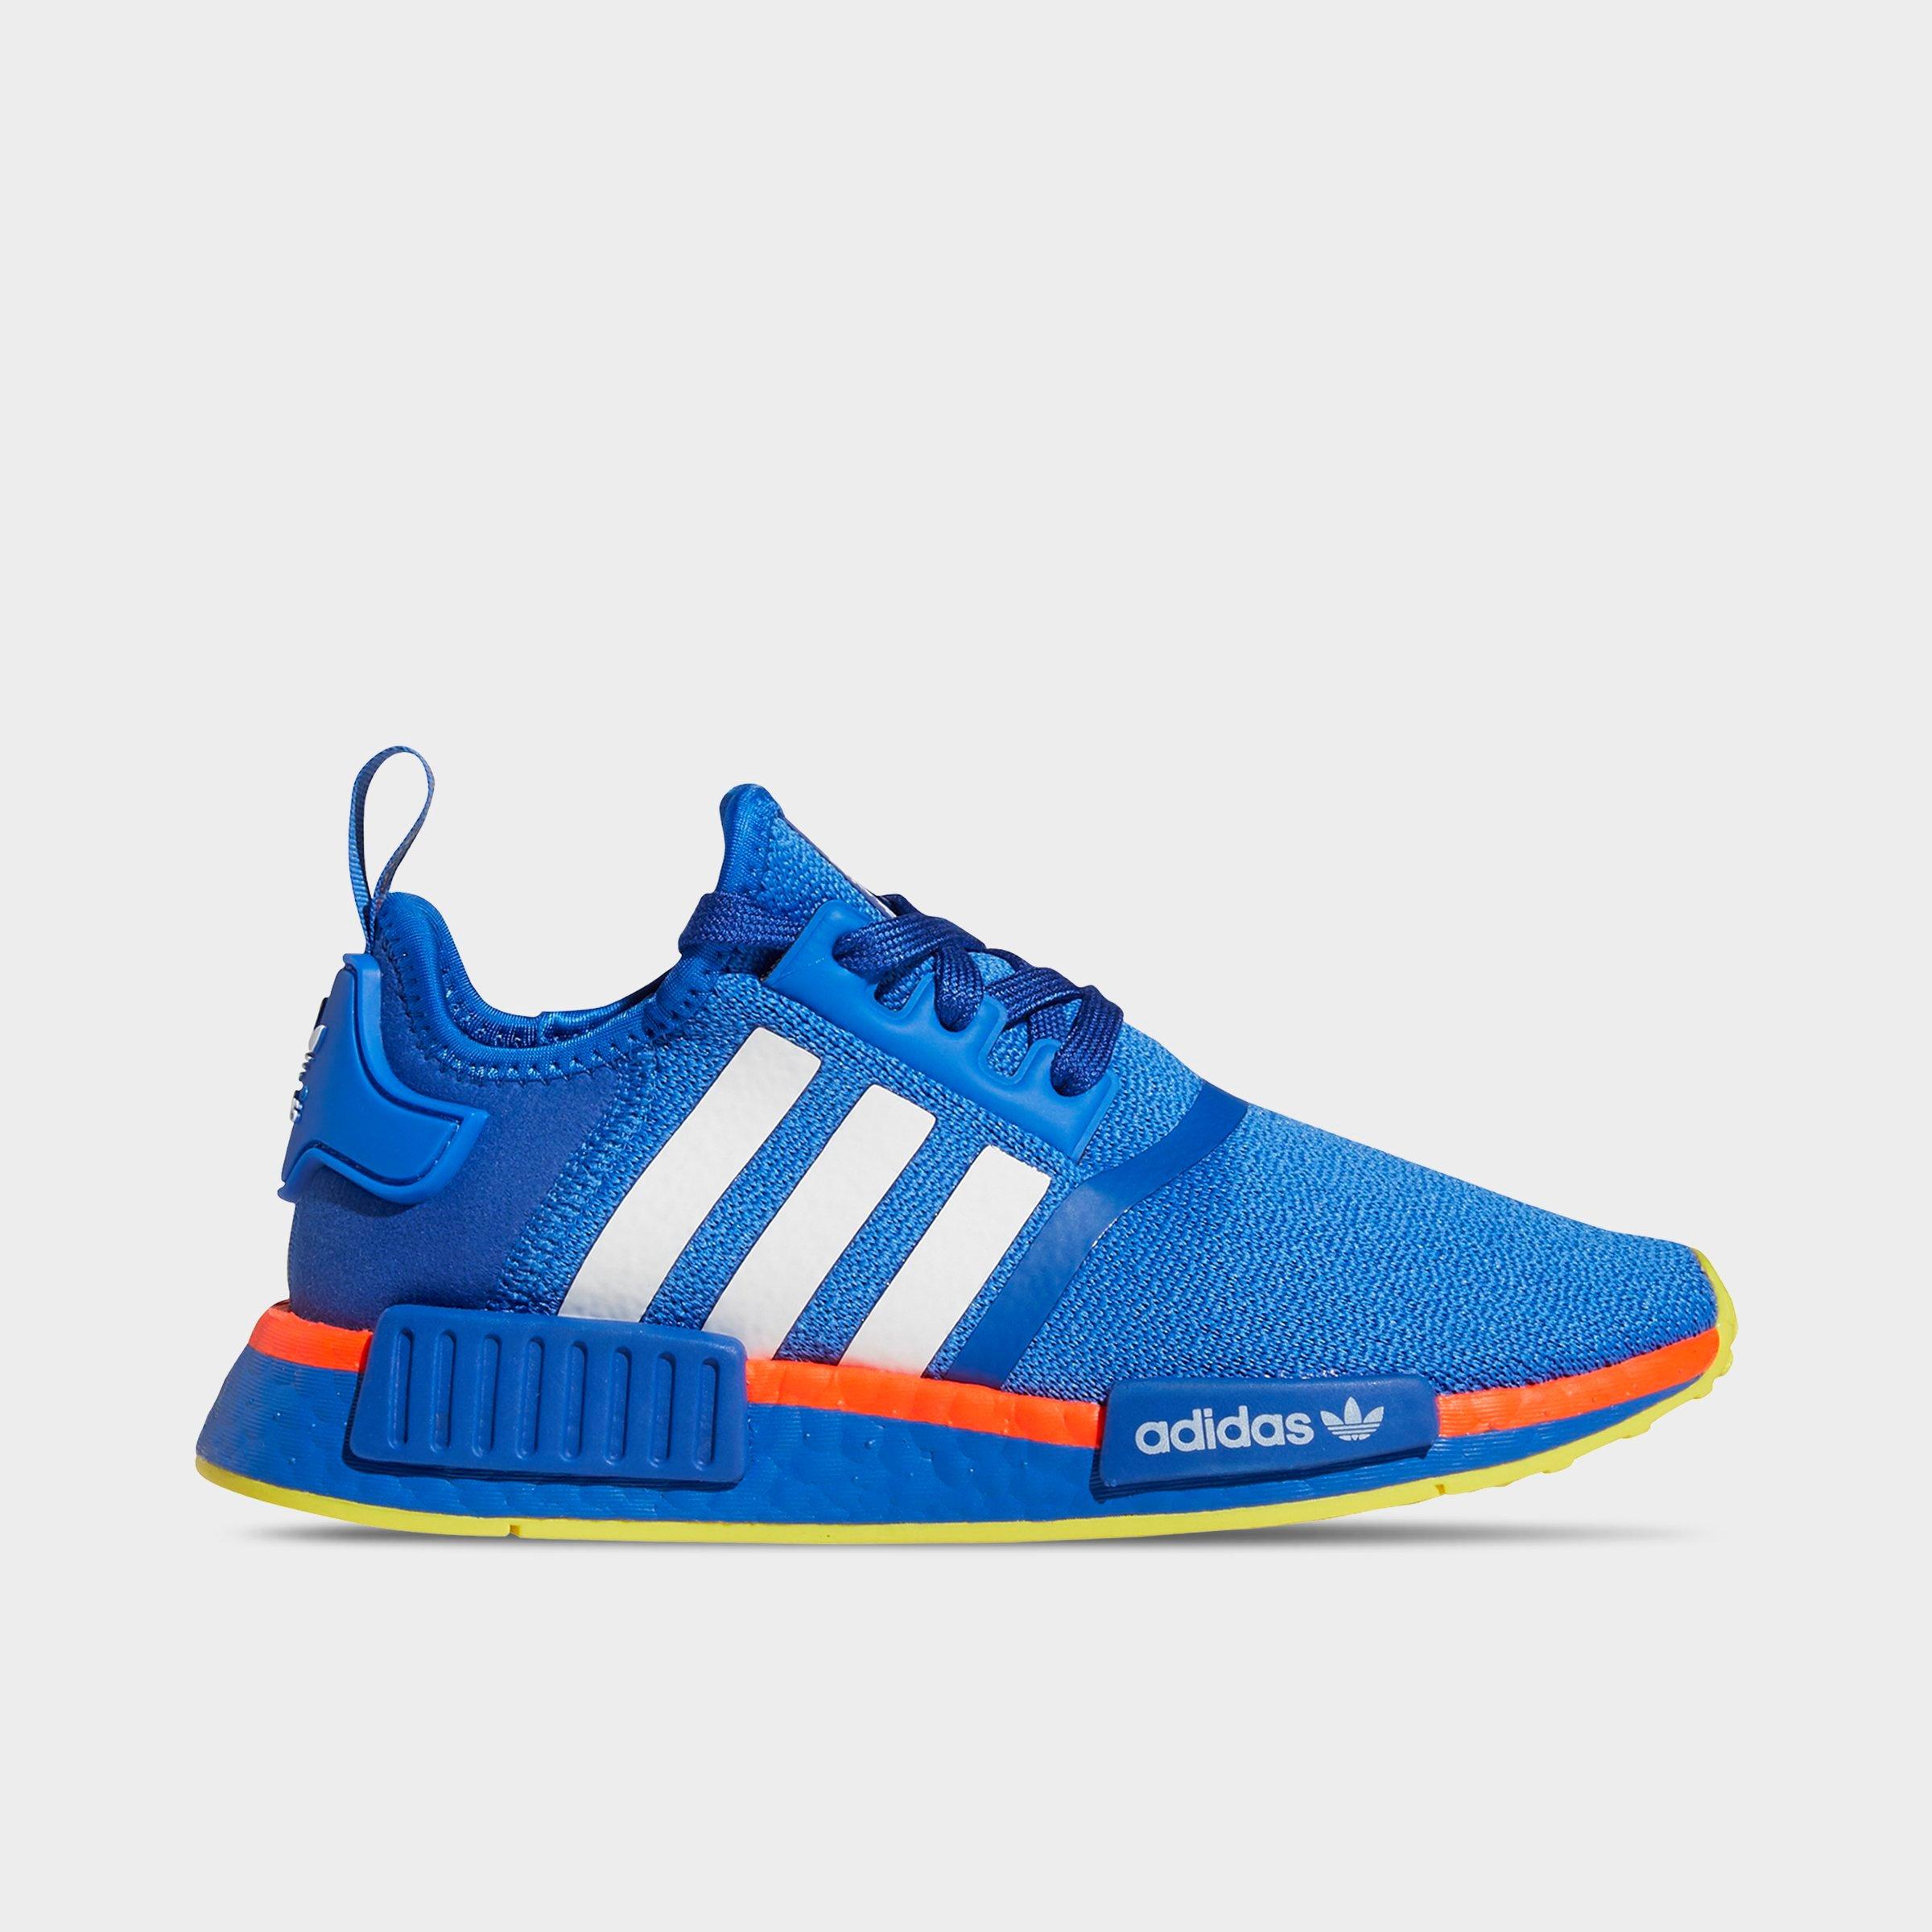 nmd r1 for kids